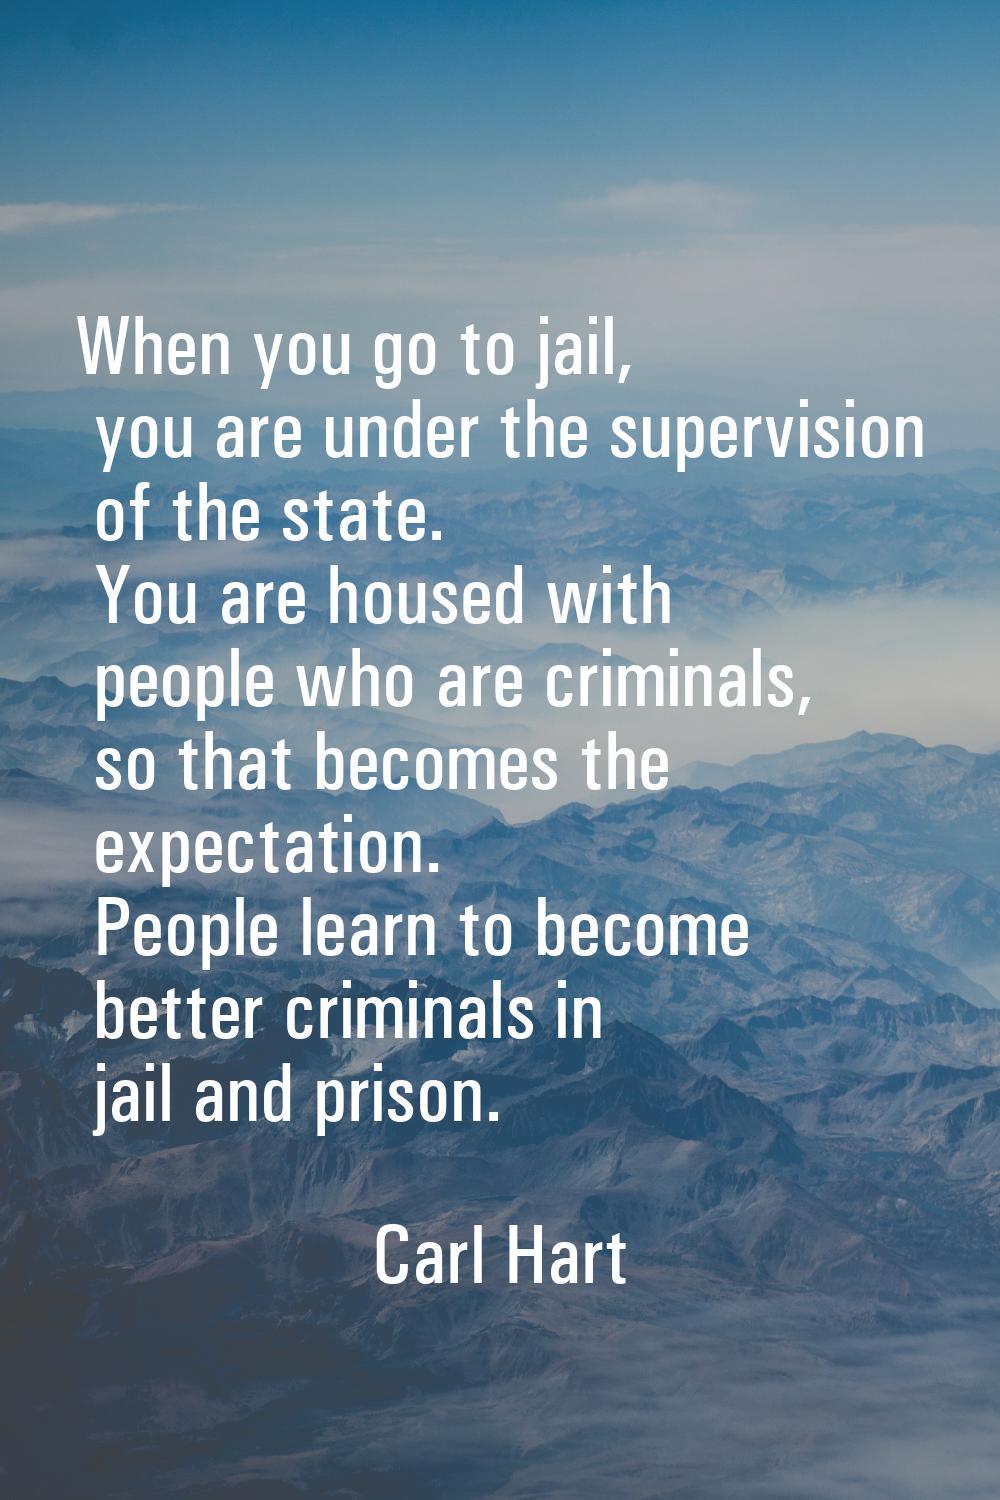 When you go to jail, you are under the supervision of the state. You are housed with people who are